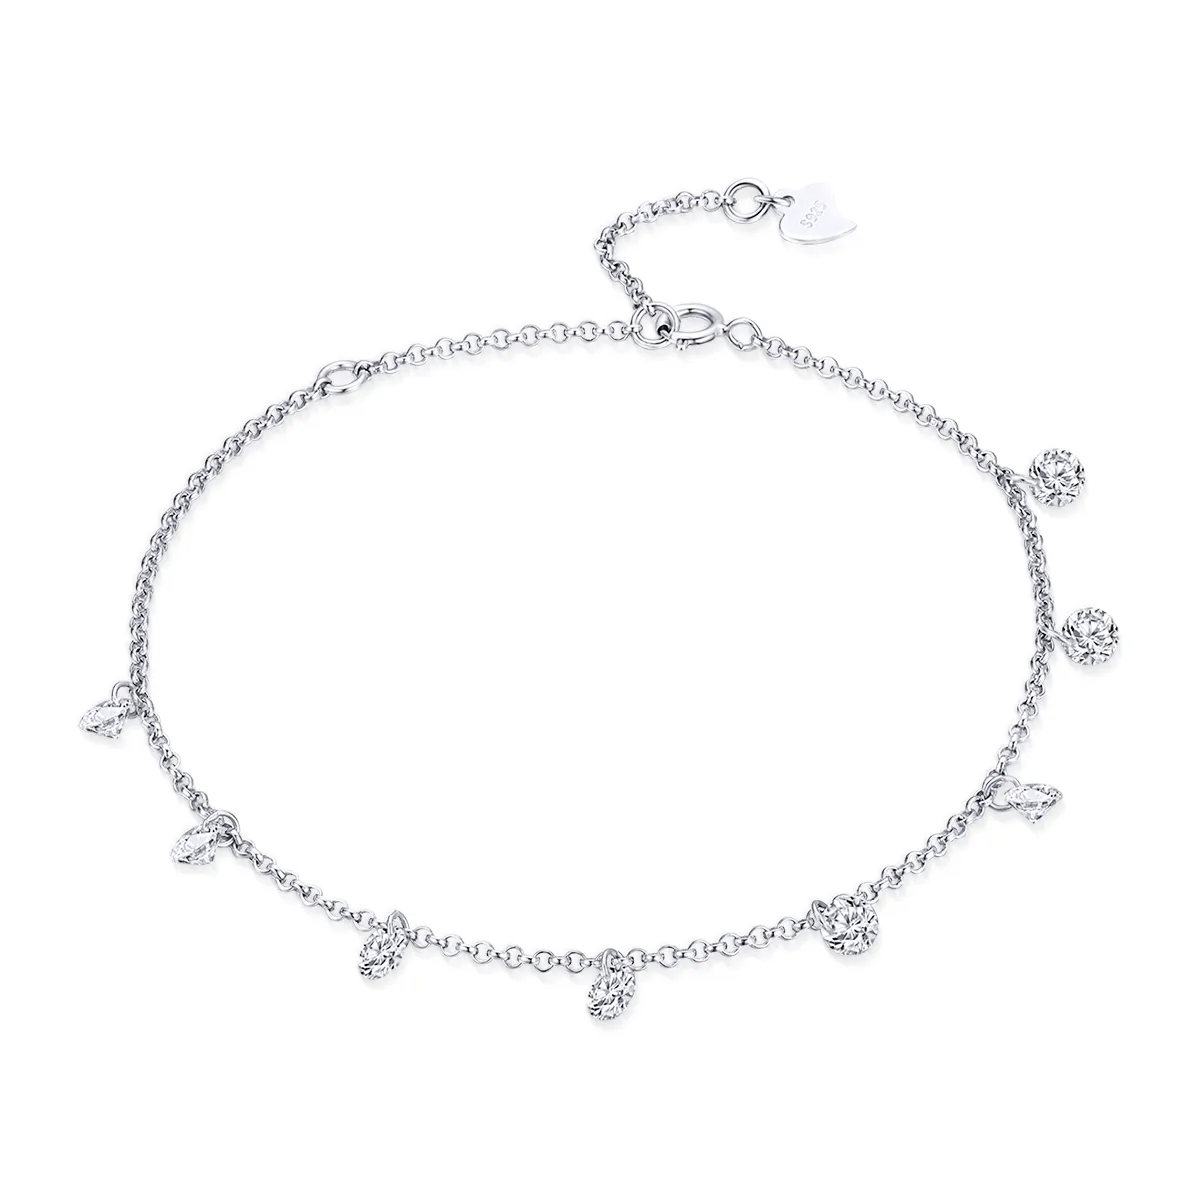 Pandora Style Silver Contracted Elves Chain Slider Bracelet - SCB103